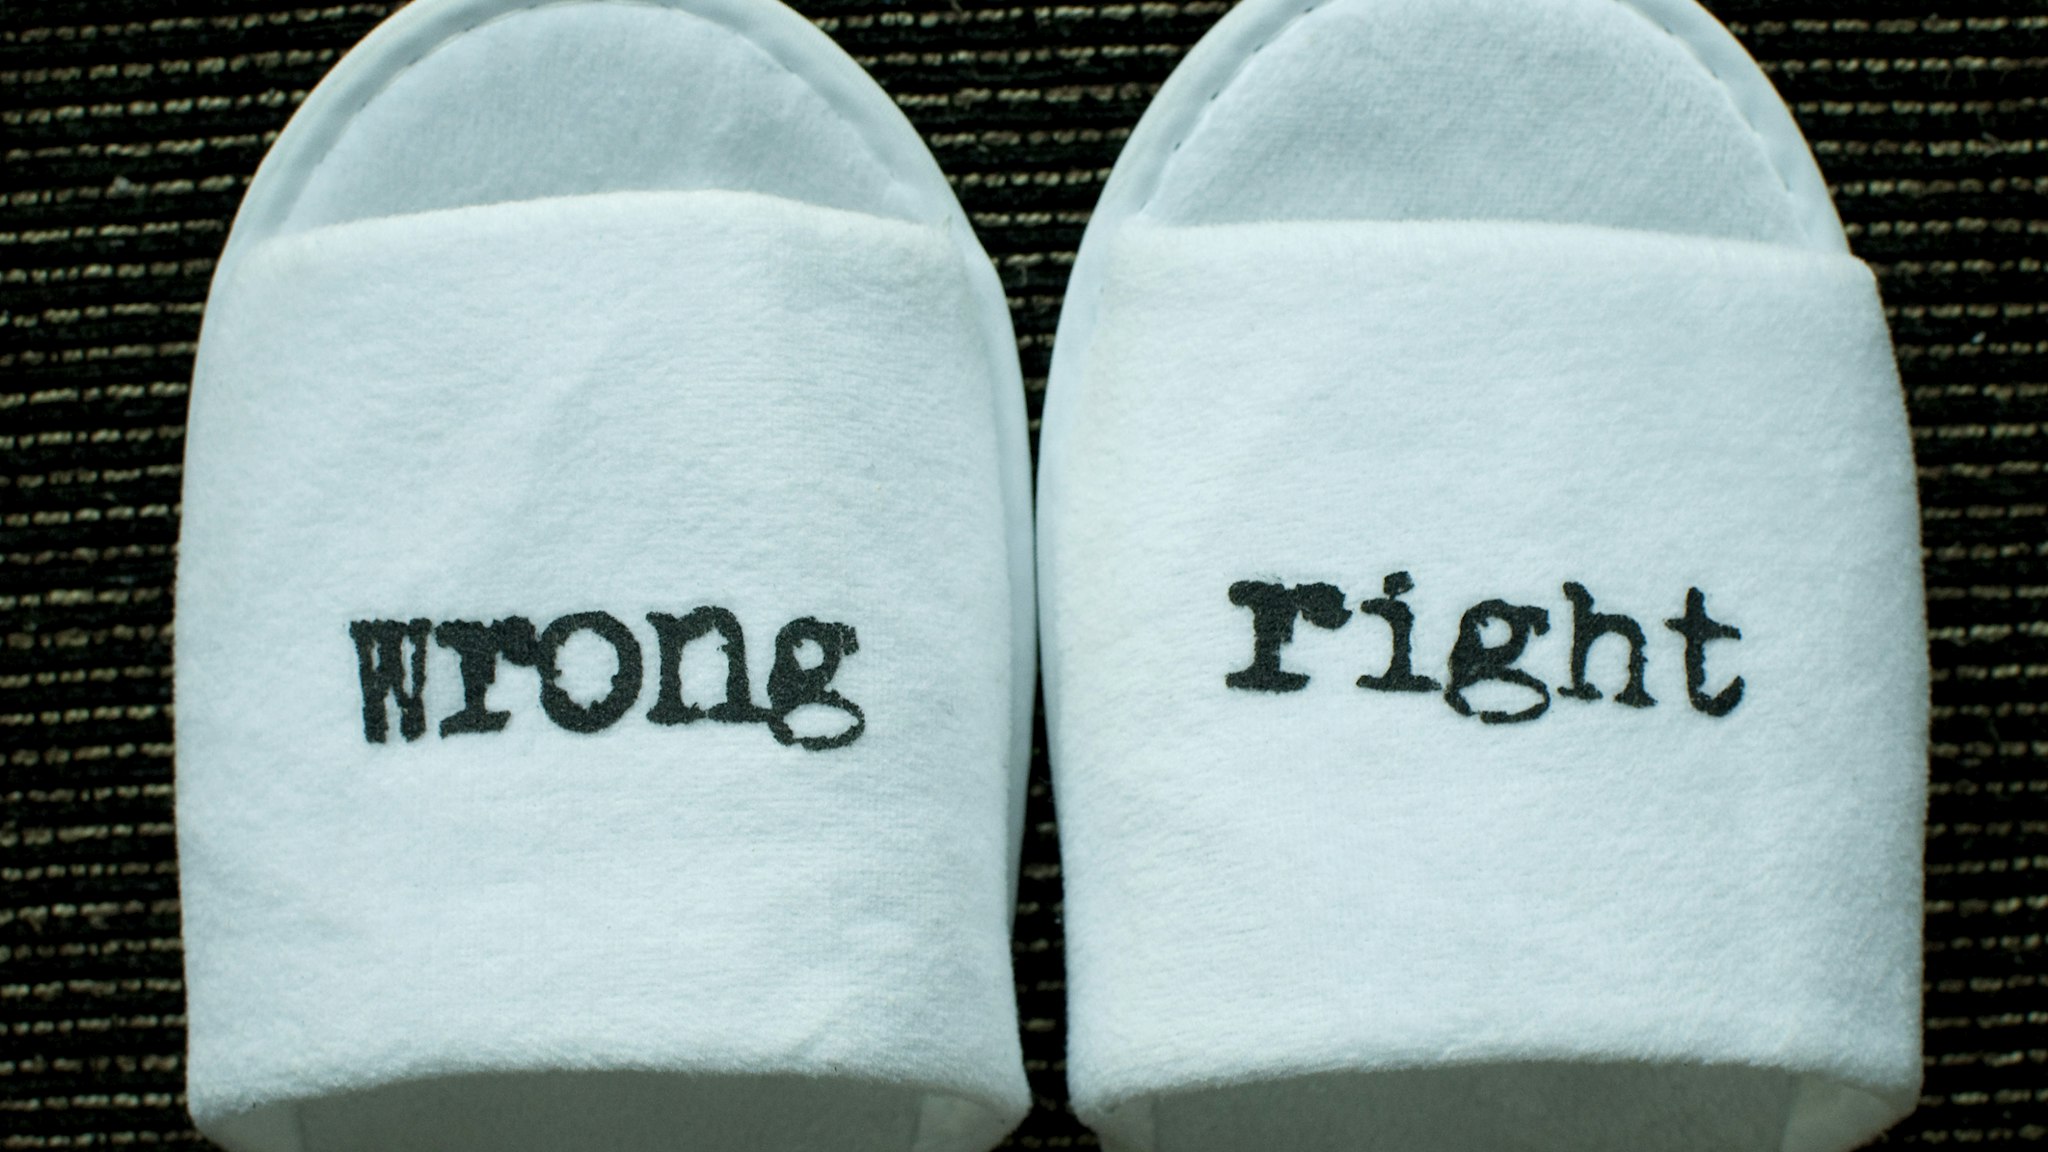 Right and wrong signs on a pair of slippers